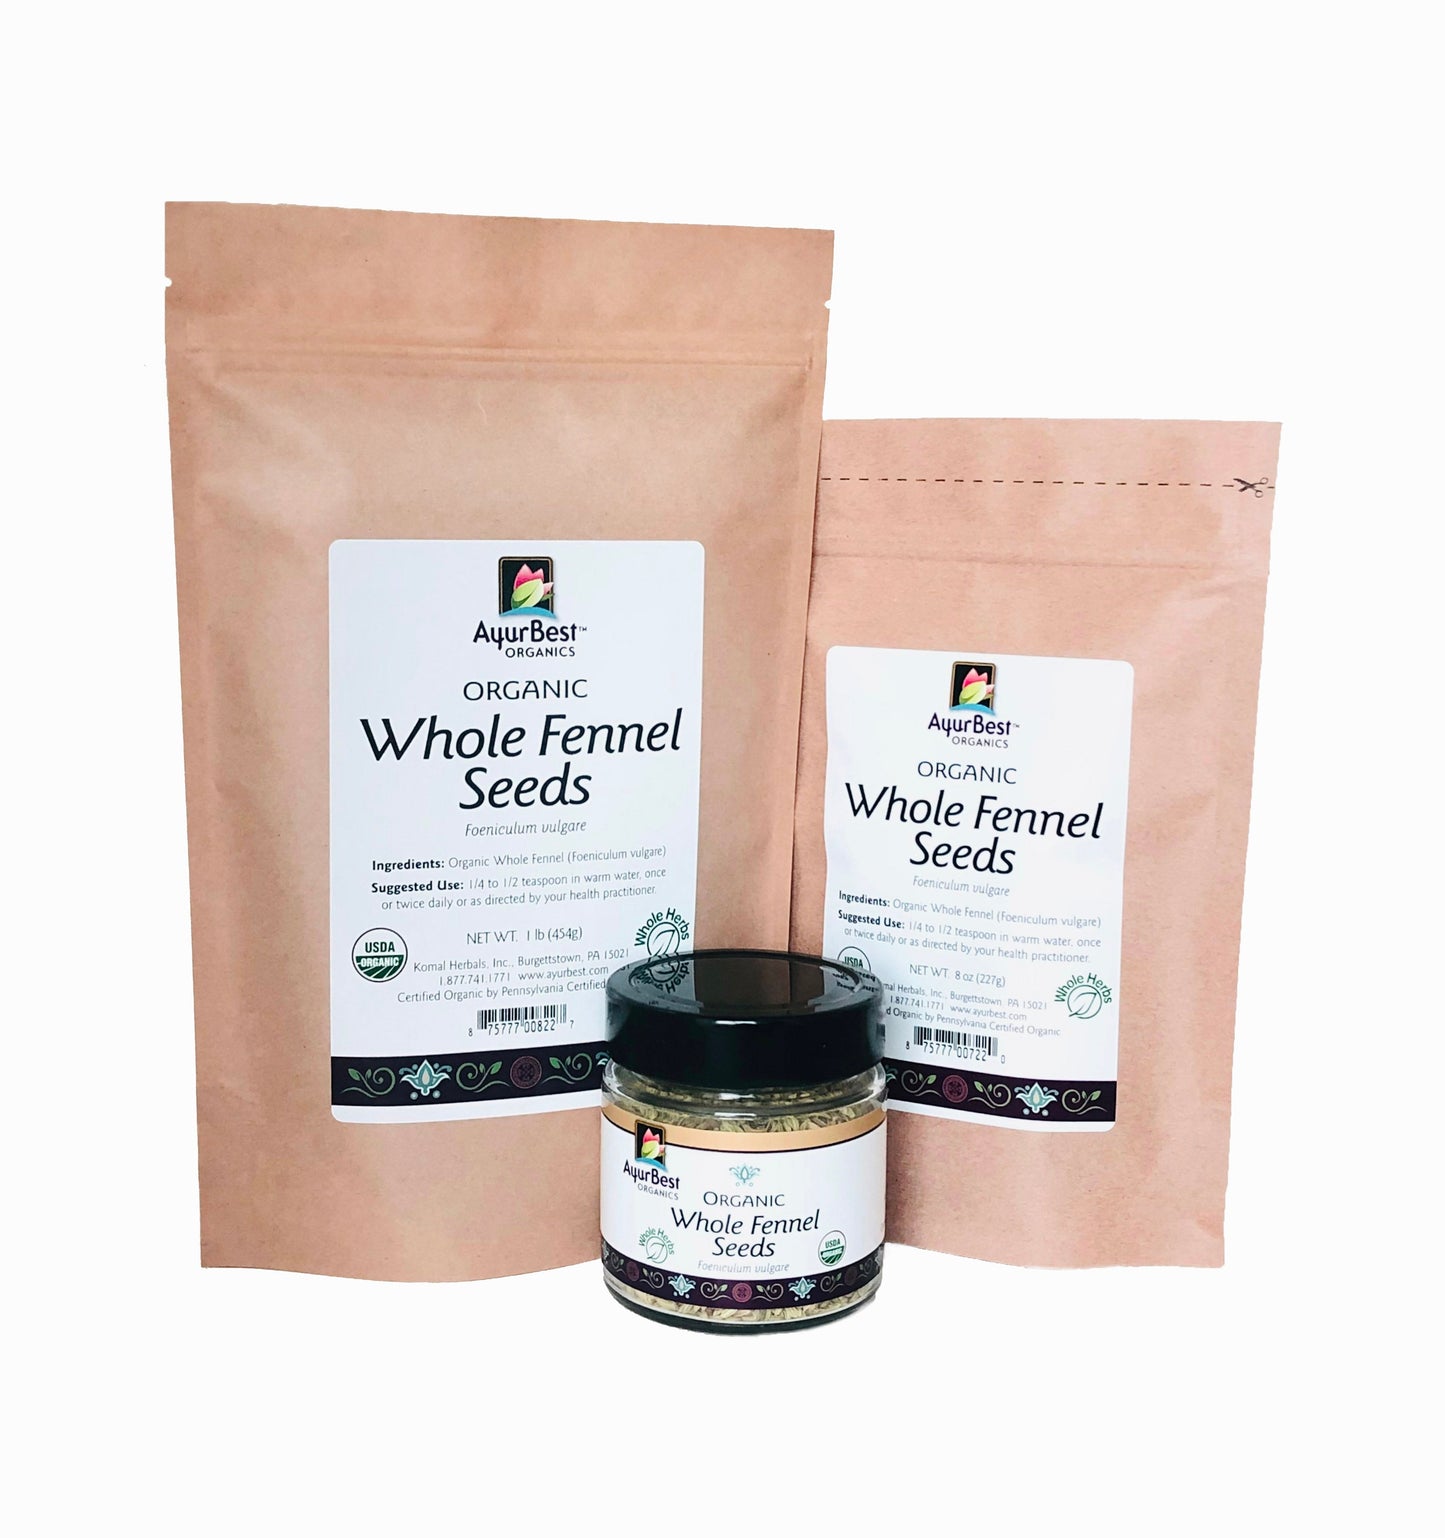 Wholesale Spices & Herbs - Fennel Seed Whole, Organic 1lb (454g) Bag